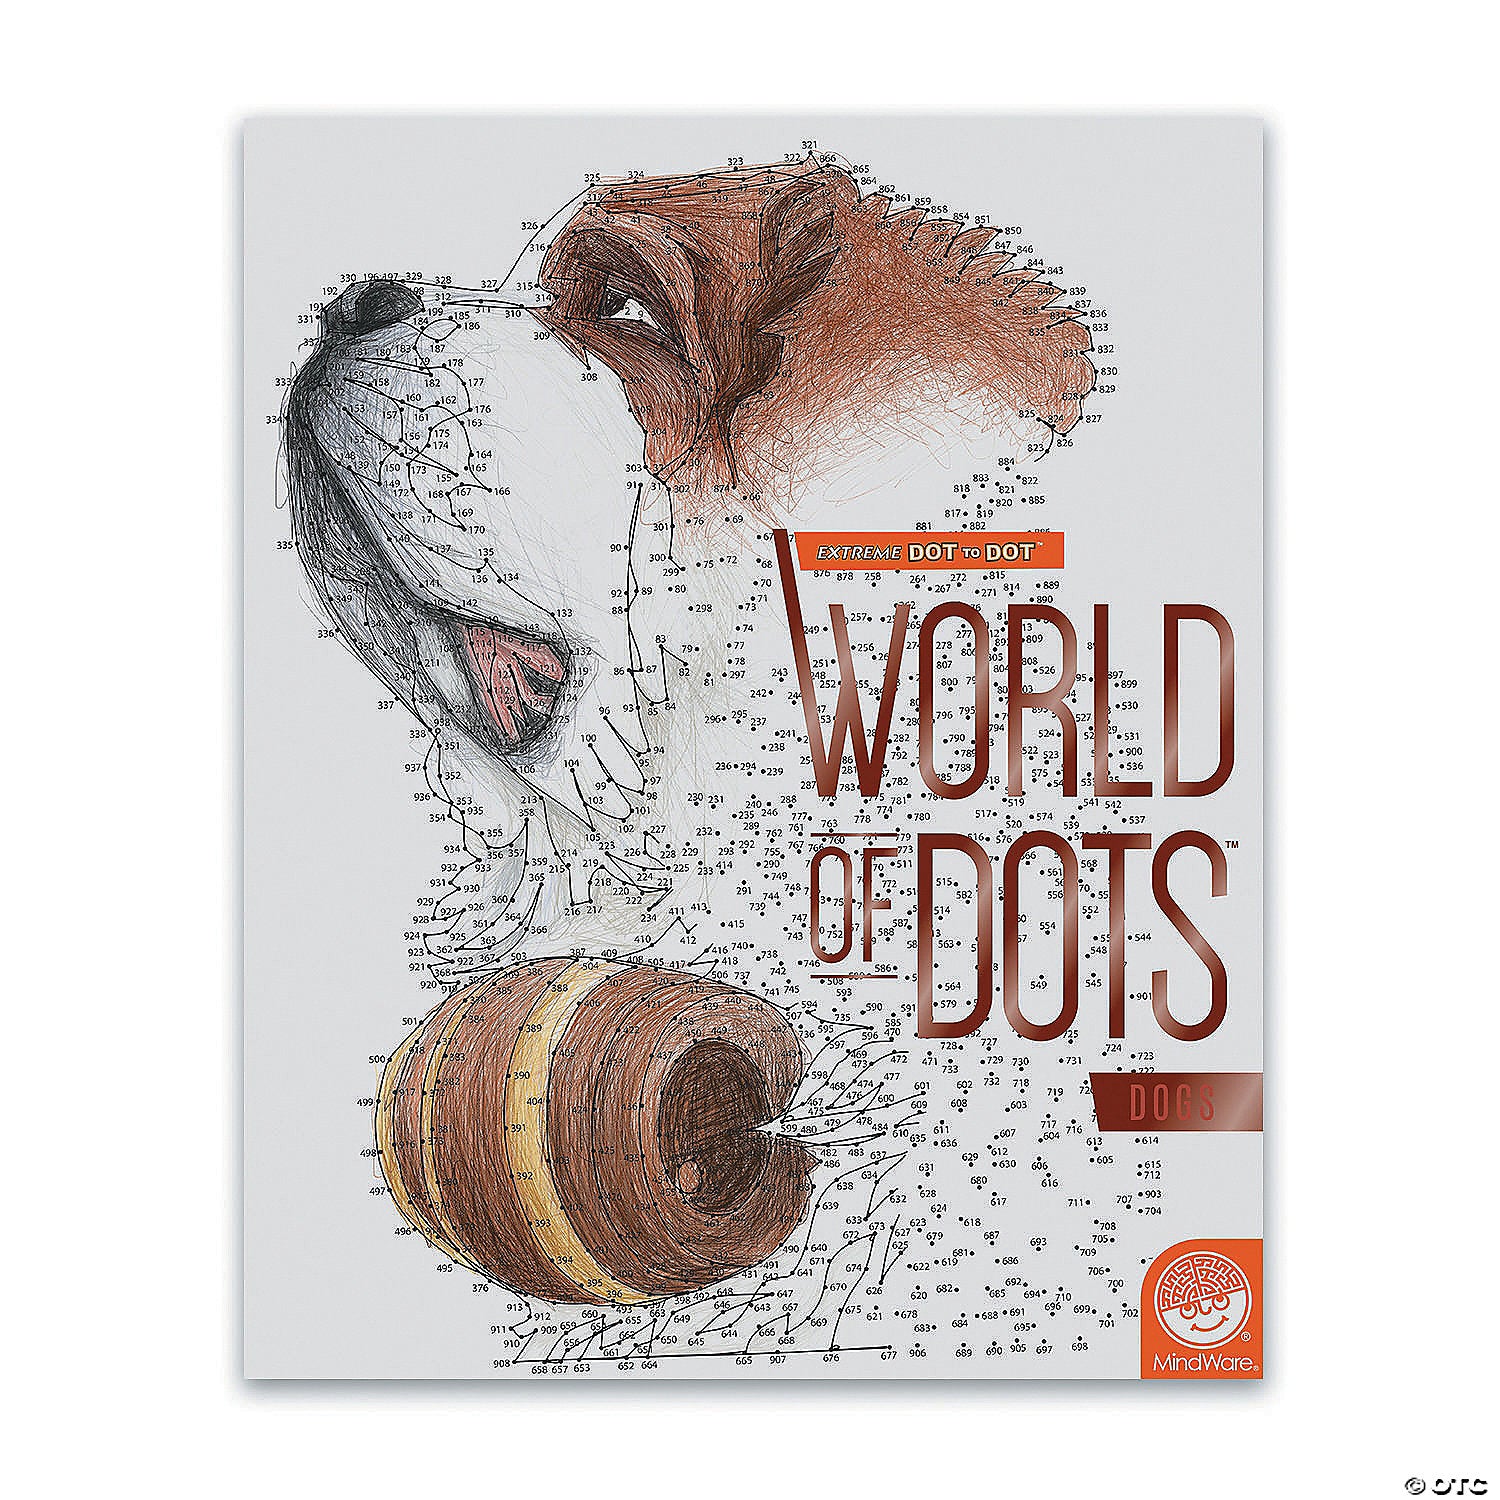 Extreme Dot to Dot World Of Dots - Dogs    